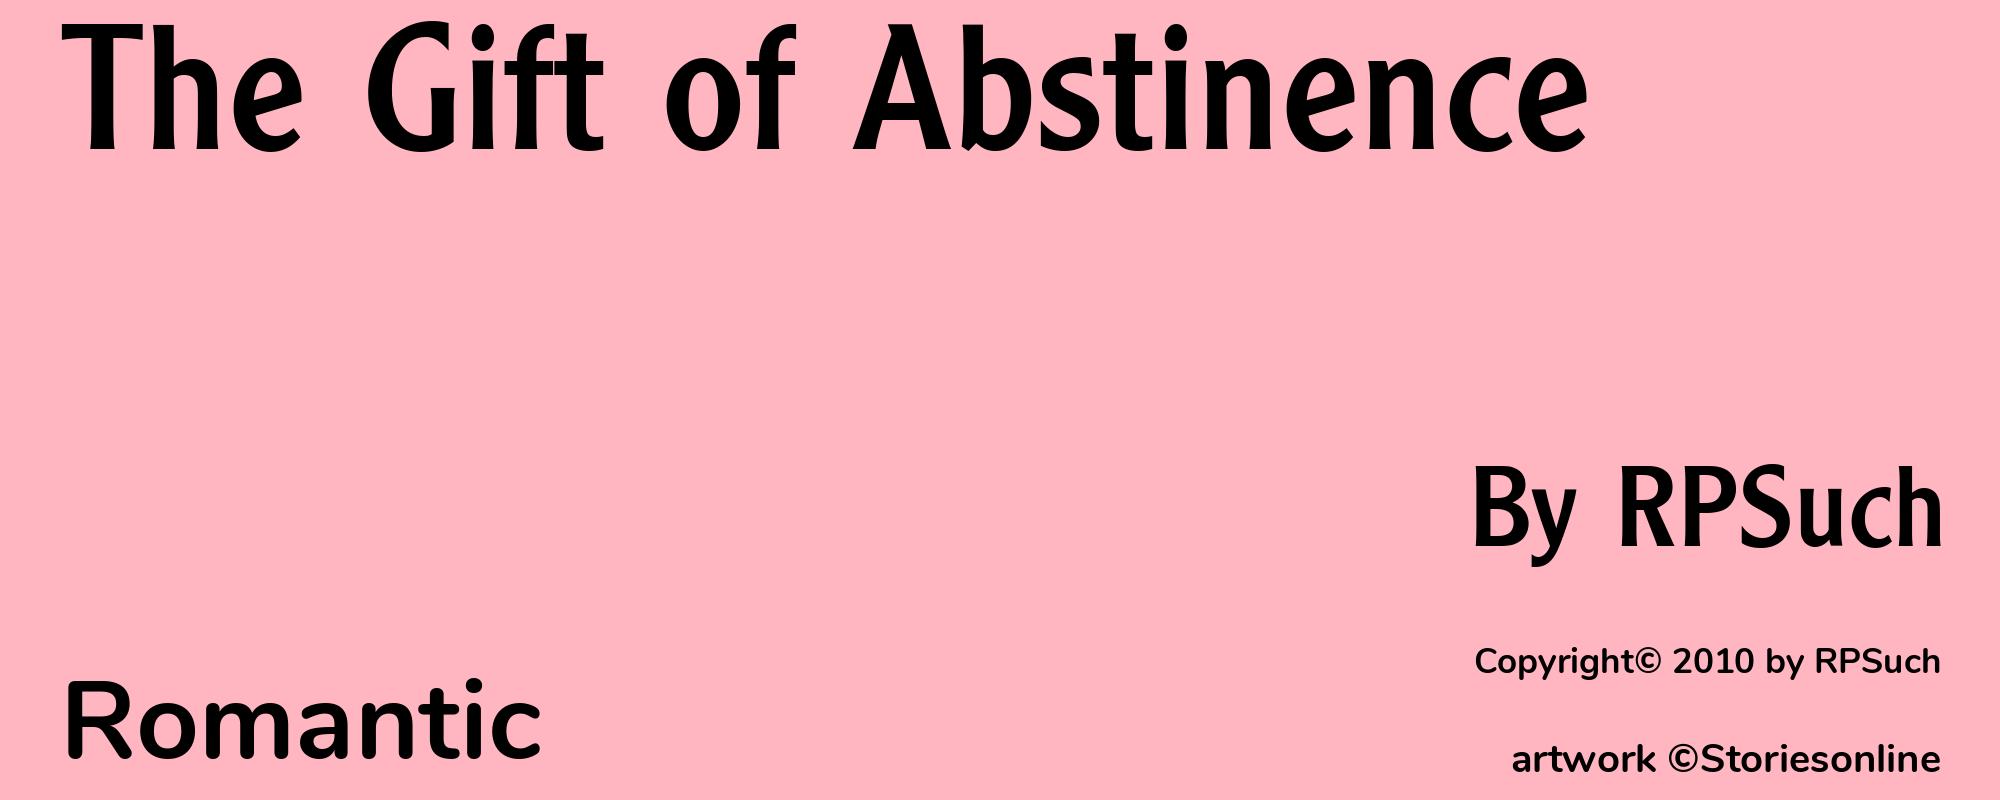 The Gift of Abstinence - Cover